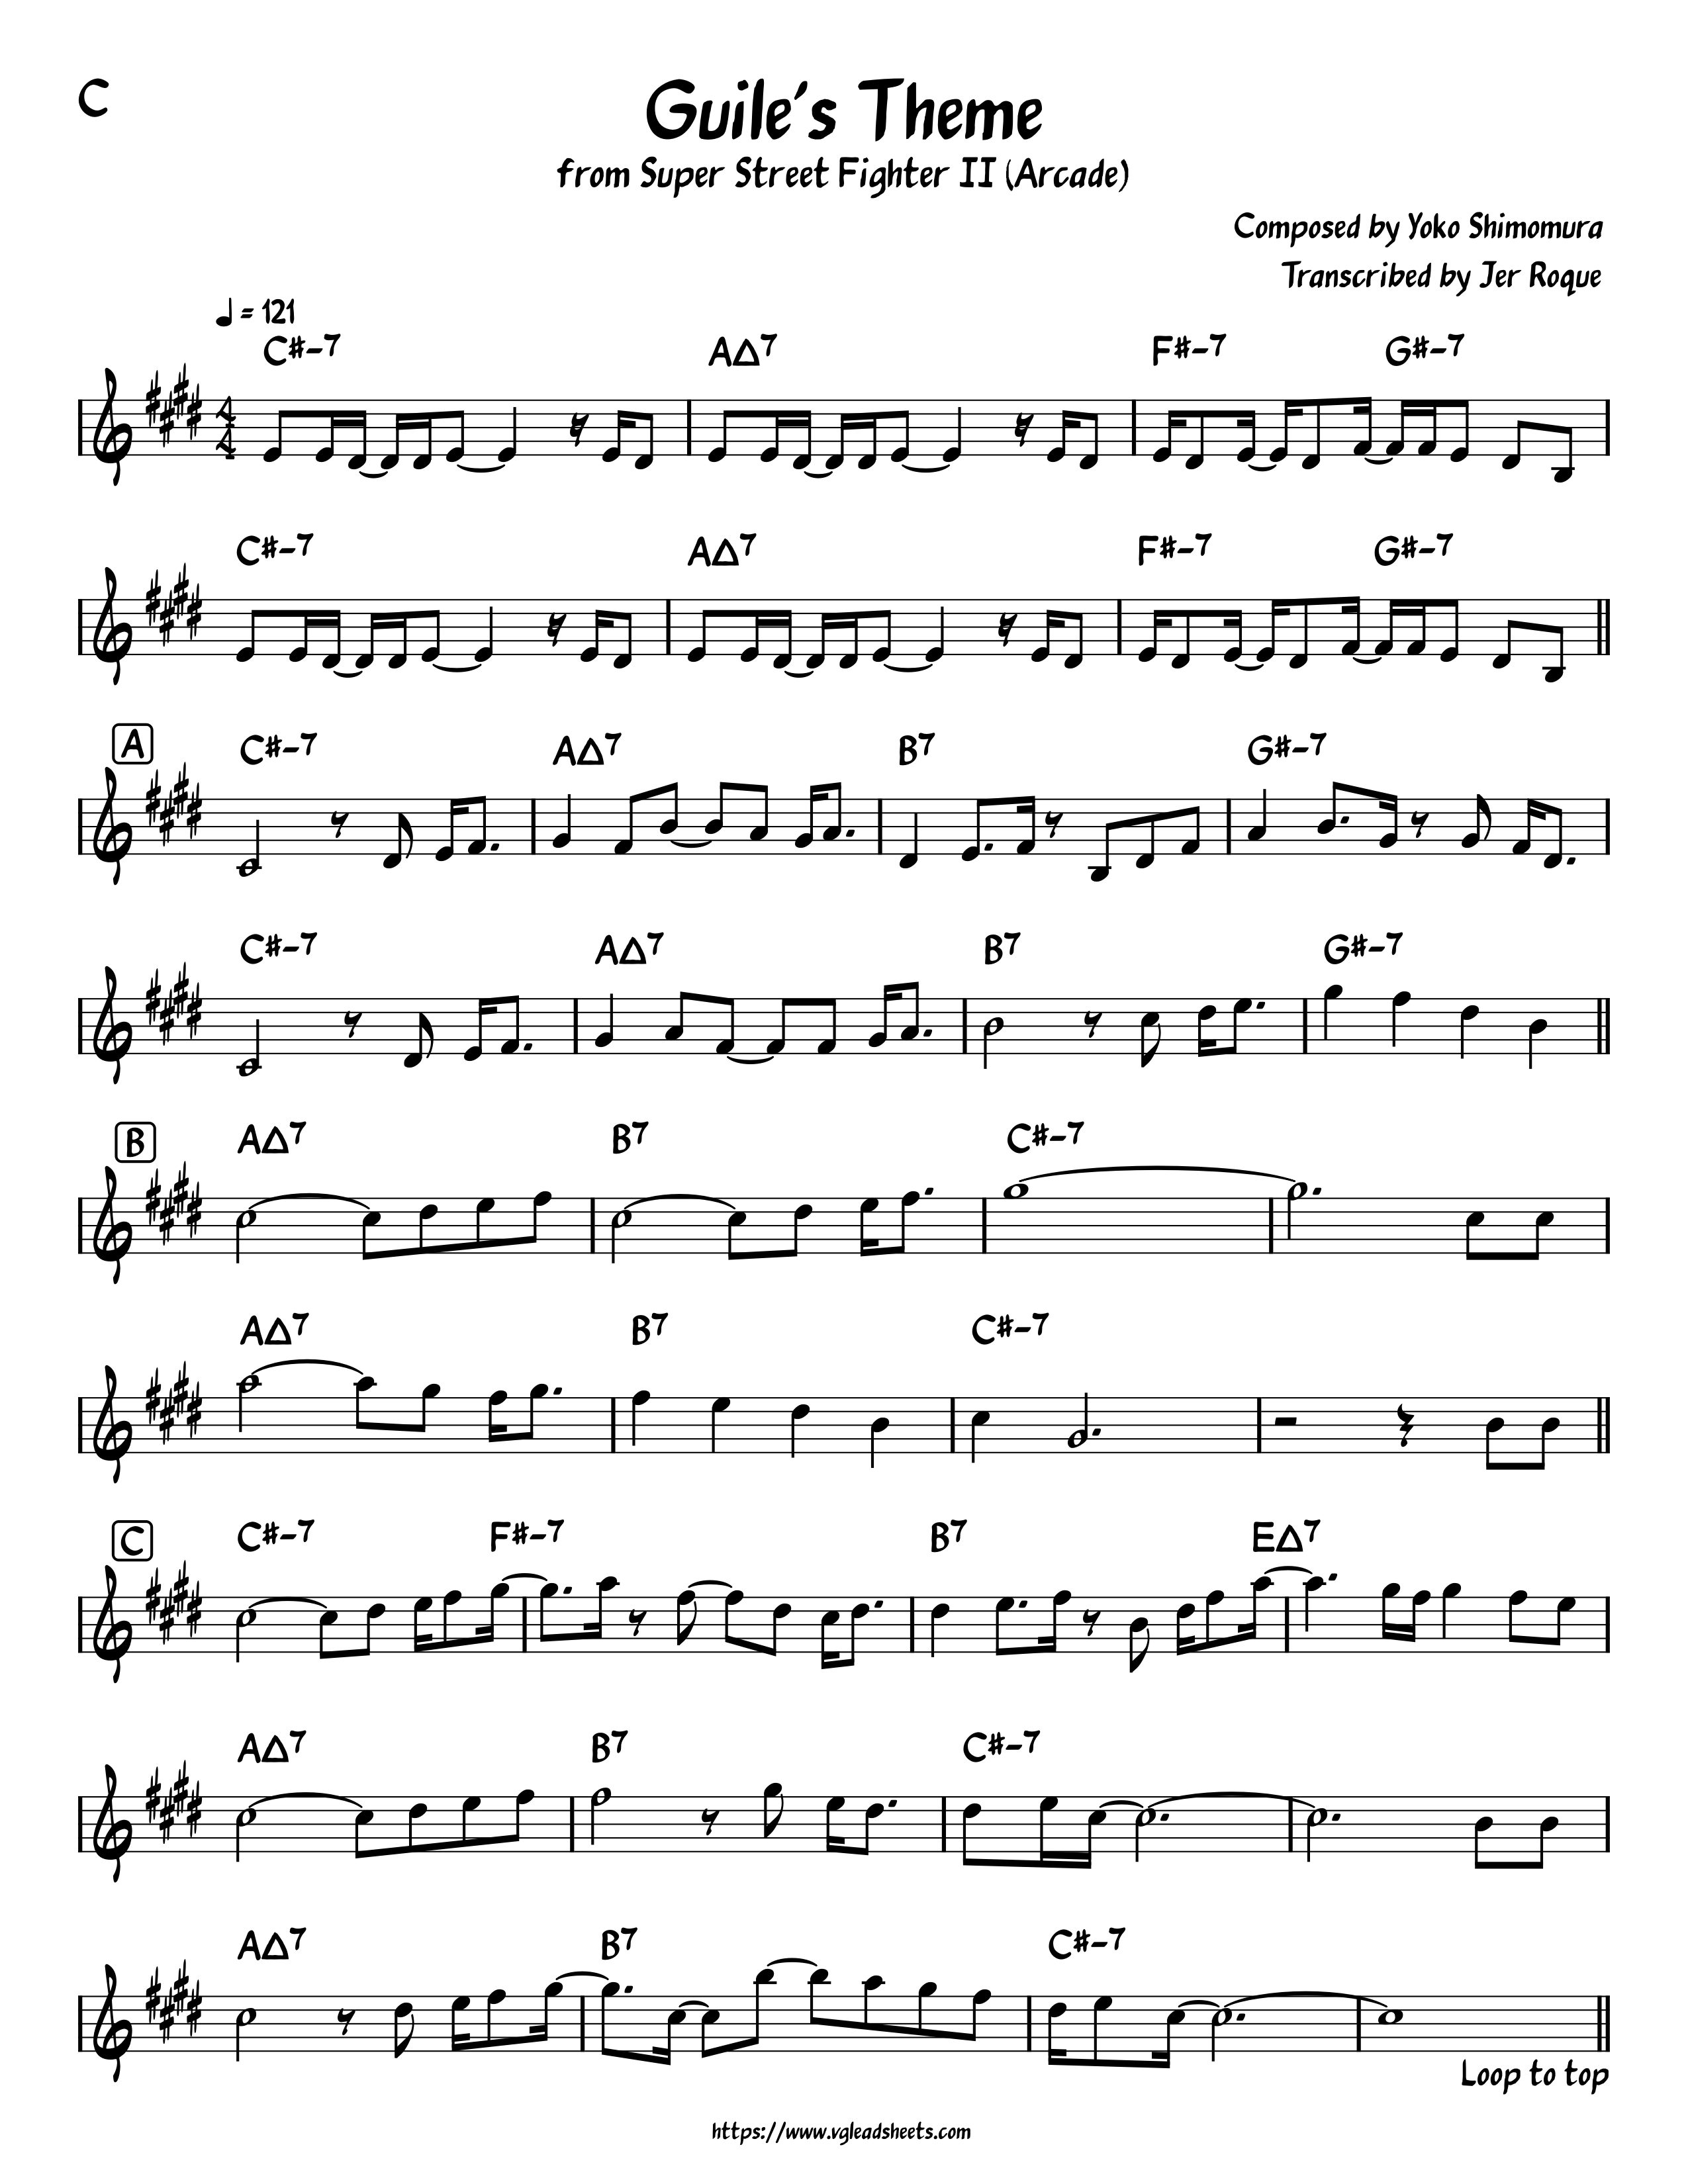 Free Green Hill Zone Theme by Misc Computer Games sheet music